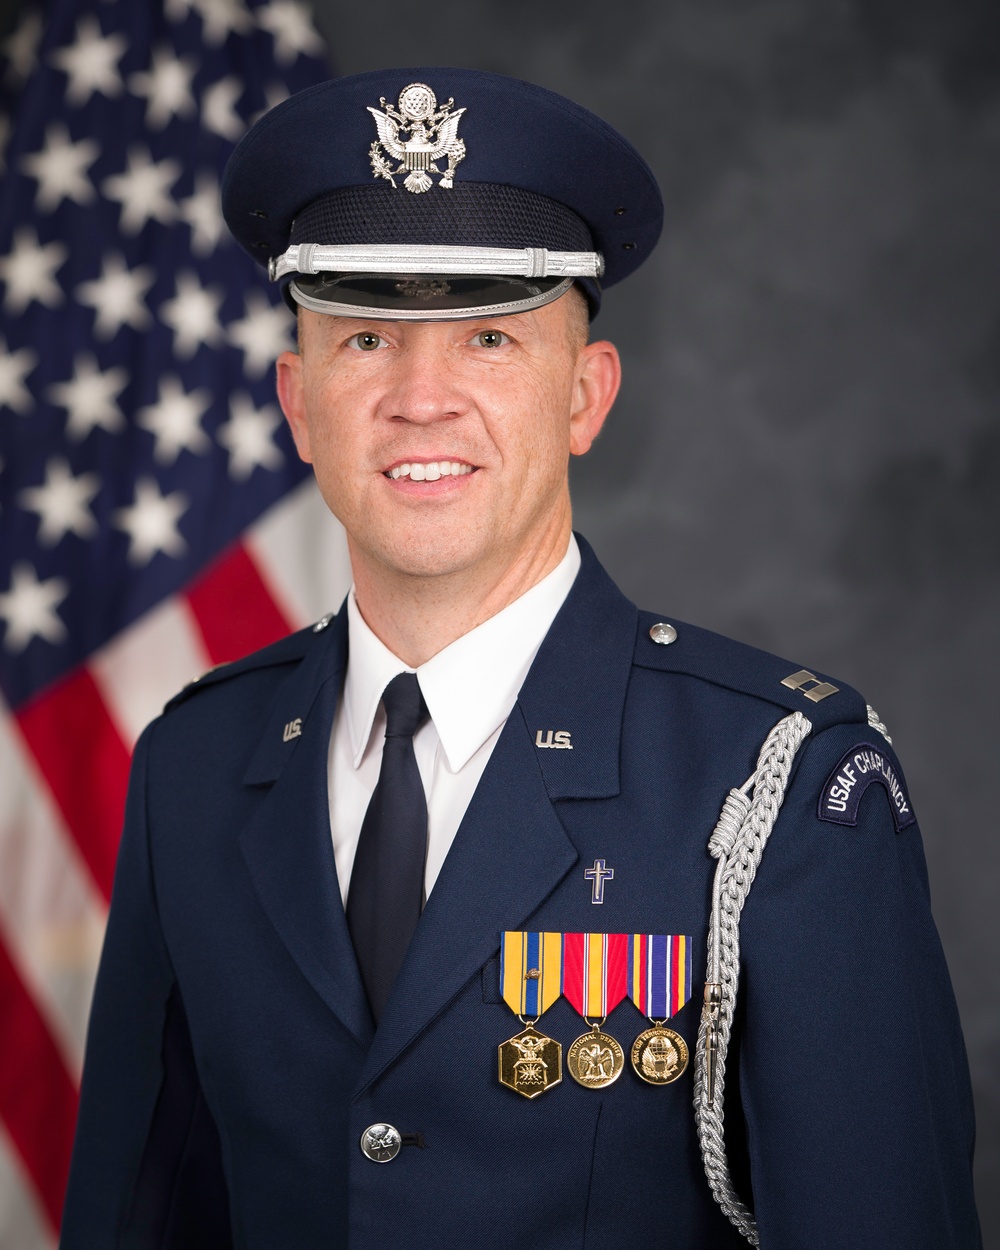 Official portrait, chaplain with the United States Air Force Chaplaincy at Arlington National Cemetery, Capt. Scott A. Foust, US Air Force